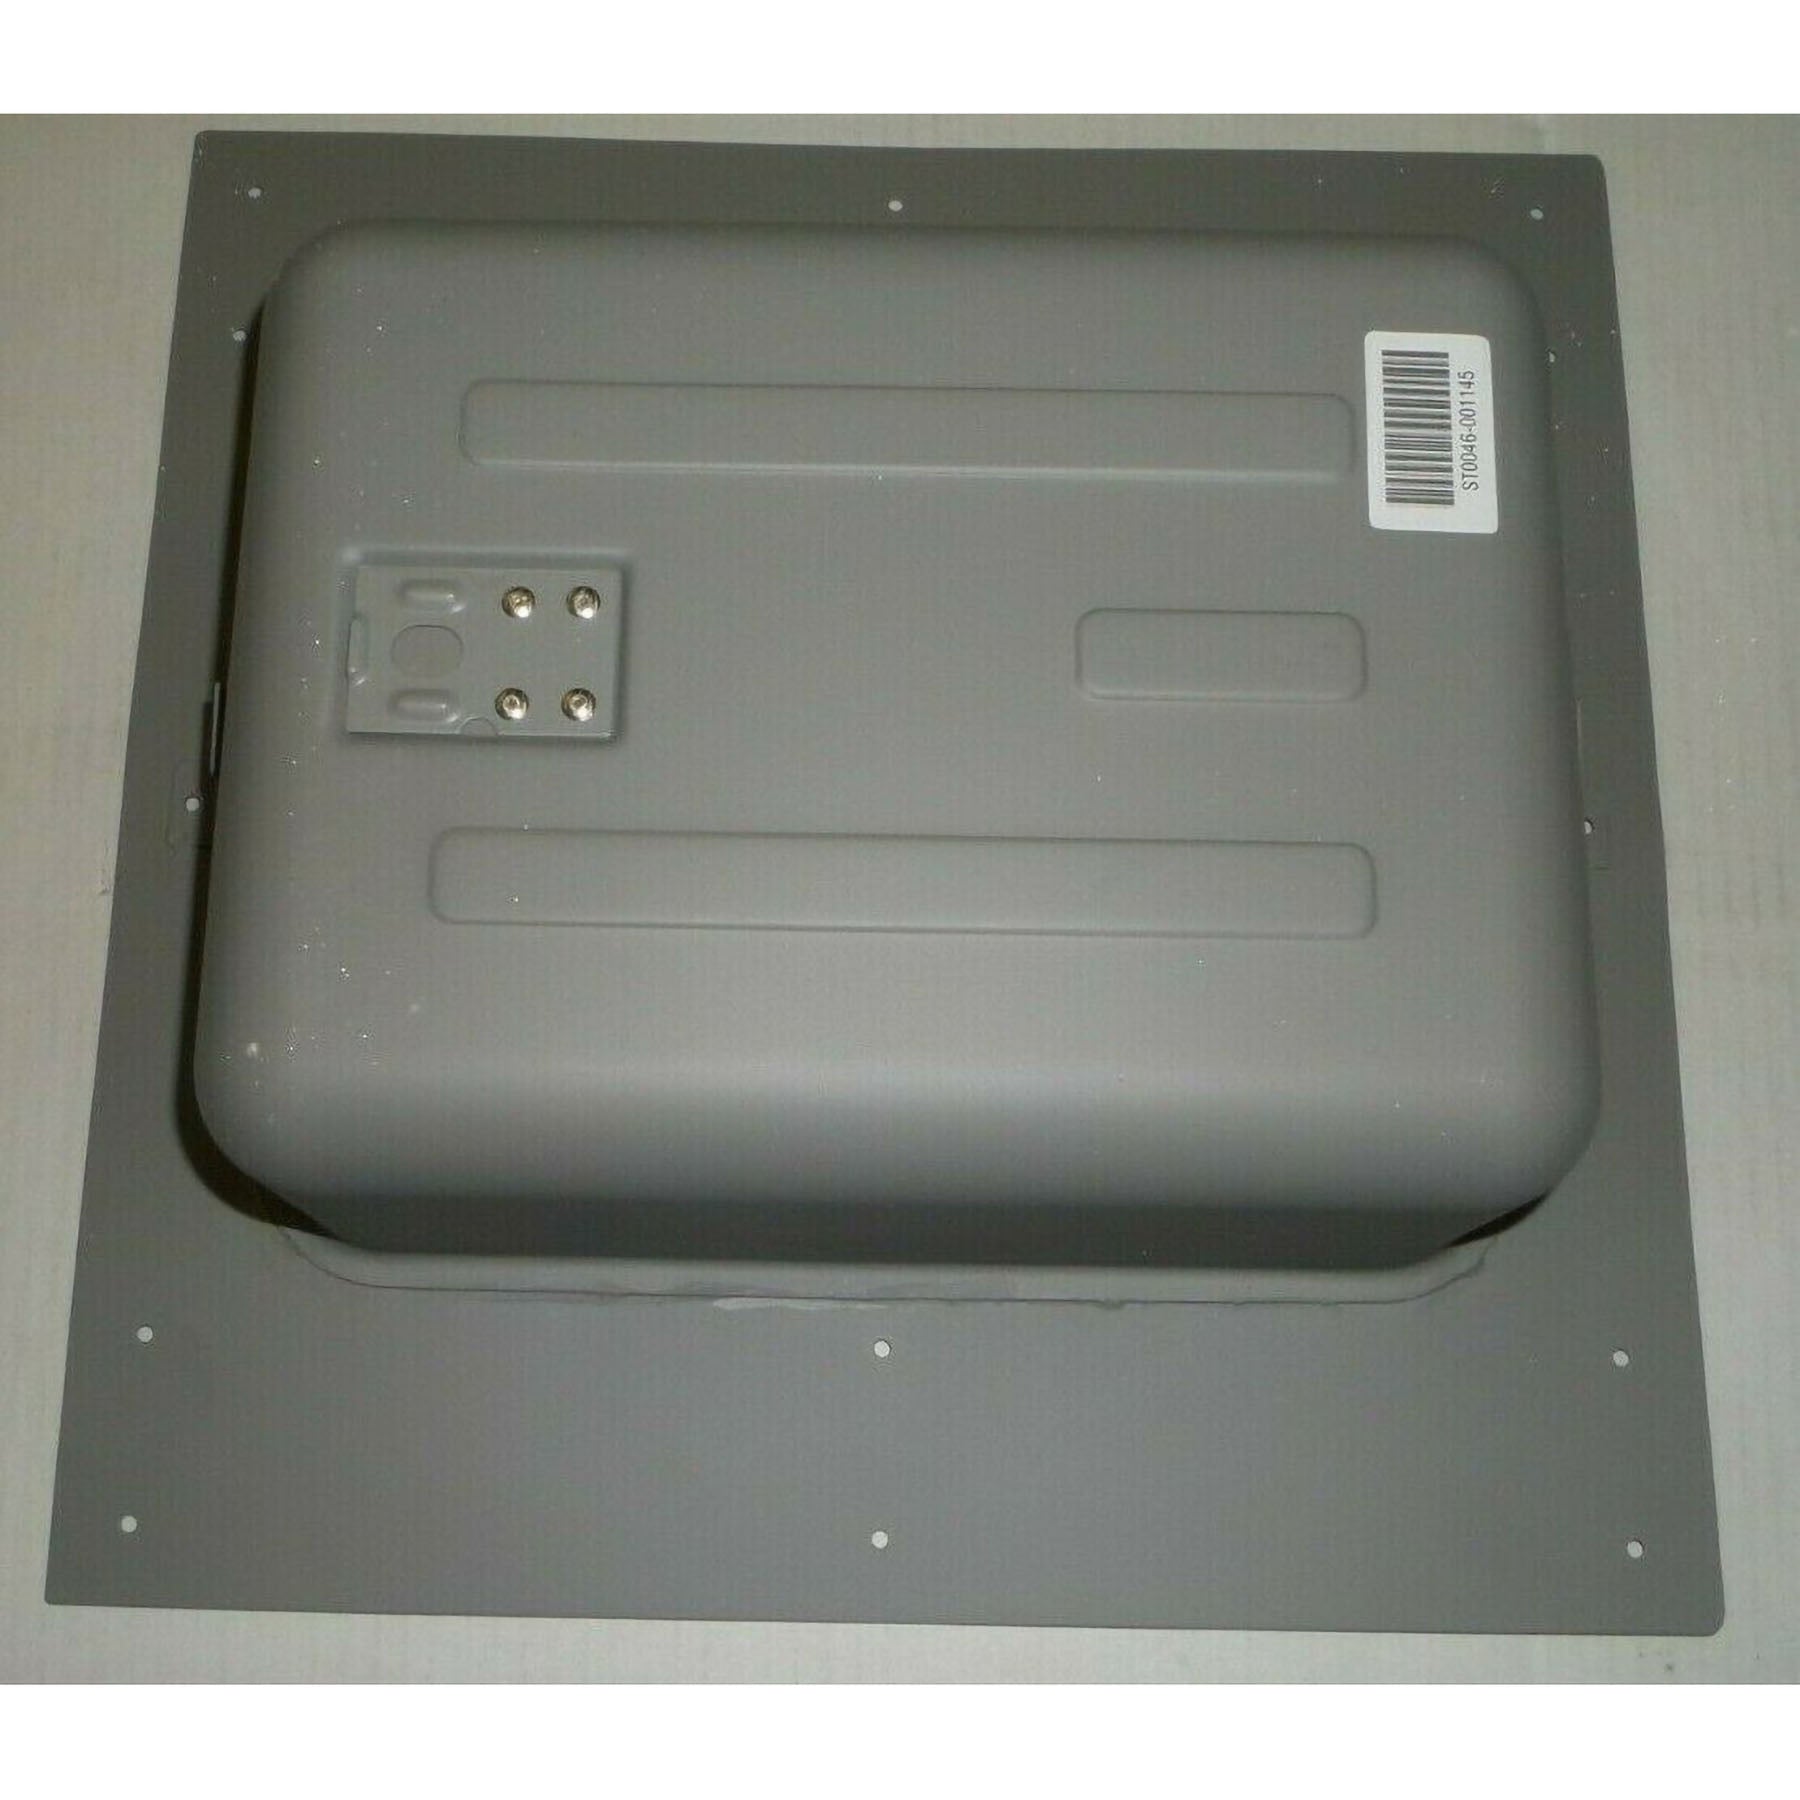 Revel FBB6 Fire Rated Back Box for all WX53 Models